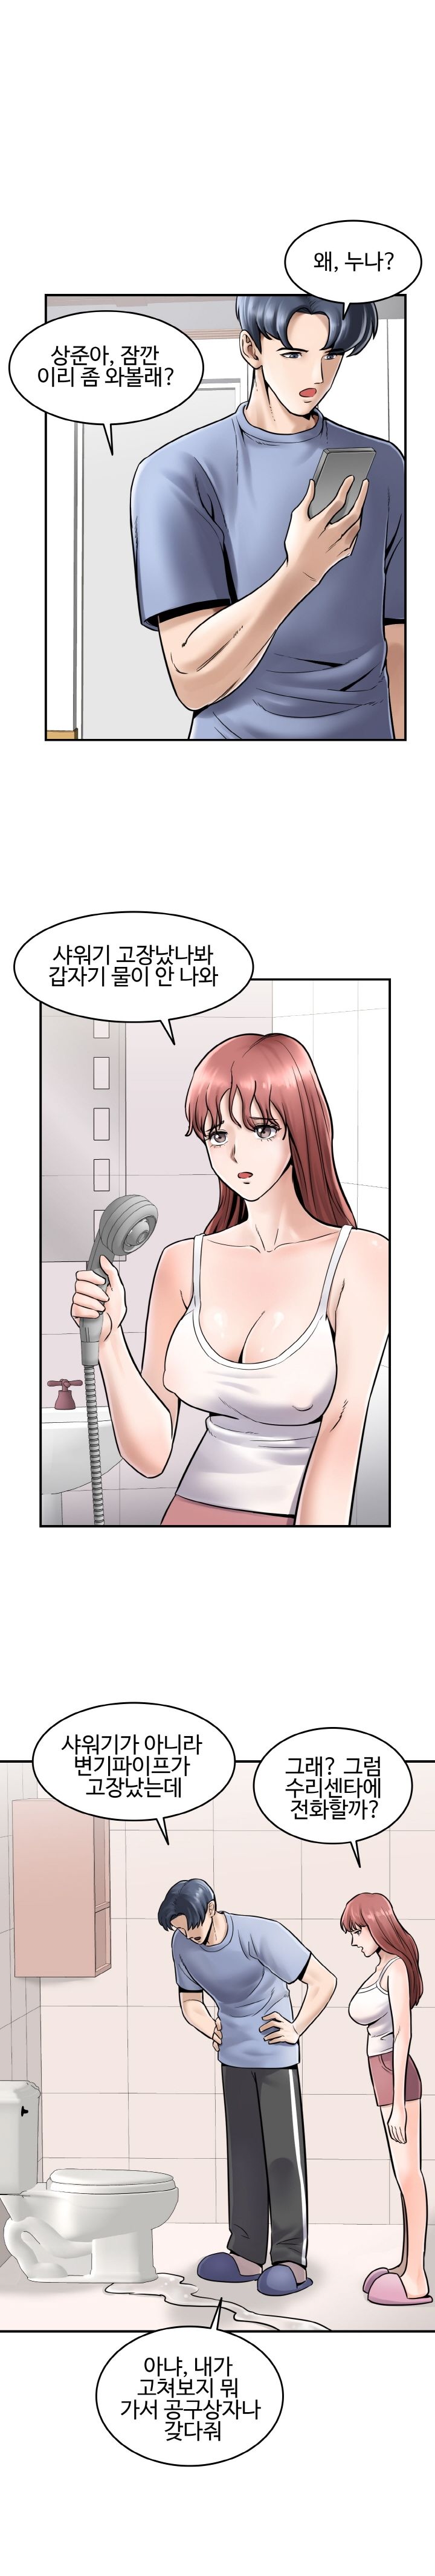 Hot Sisters Raw - Chapter 1 Page 2